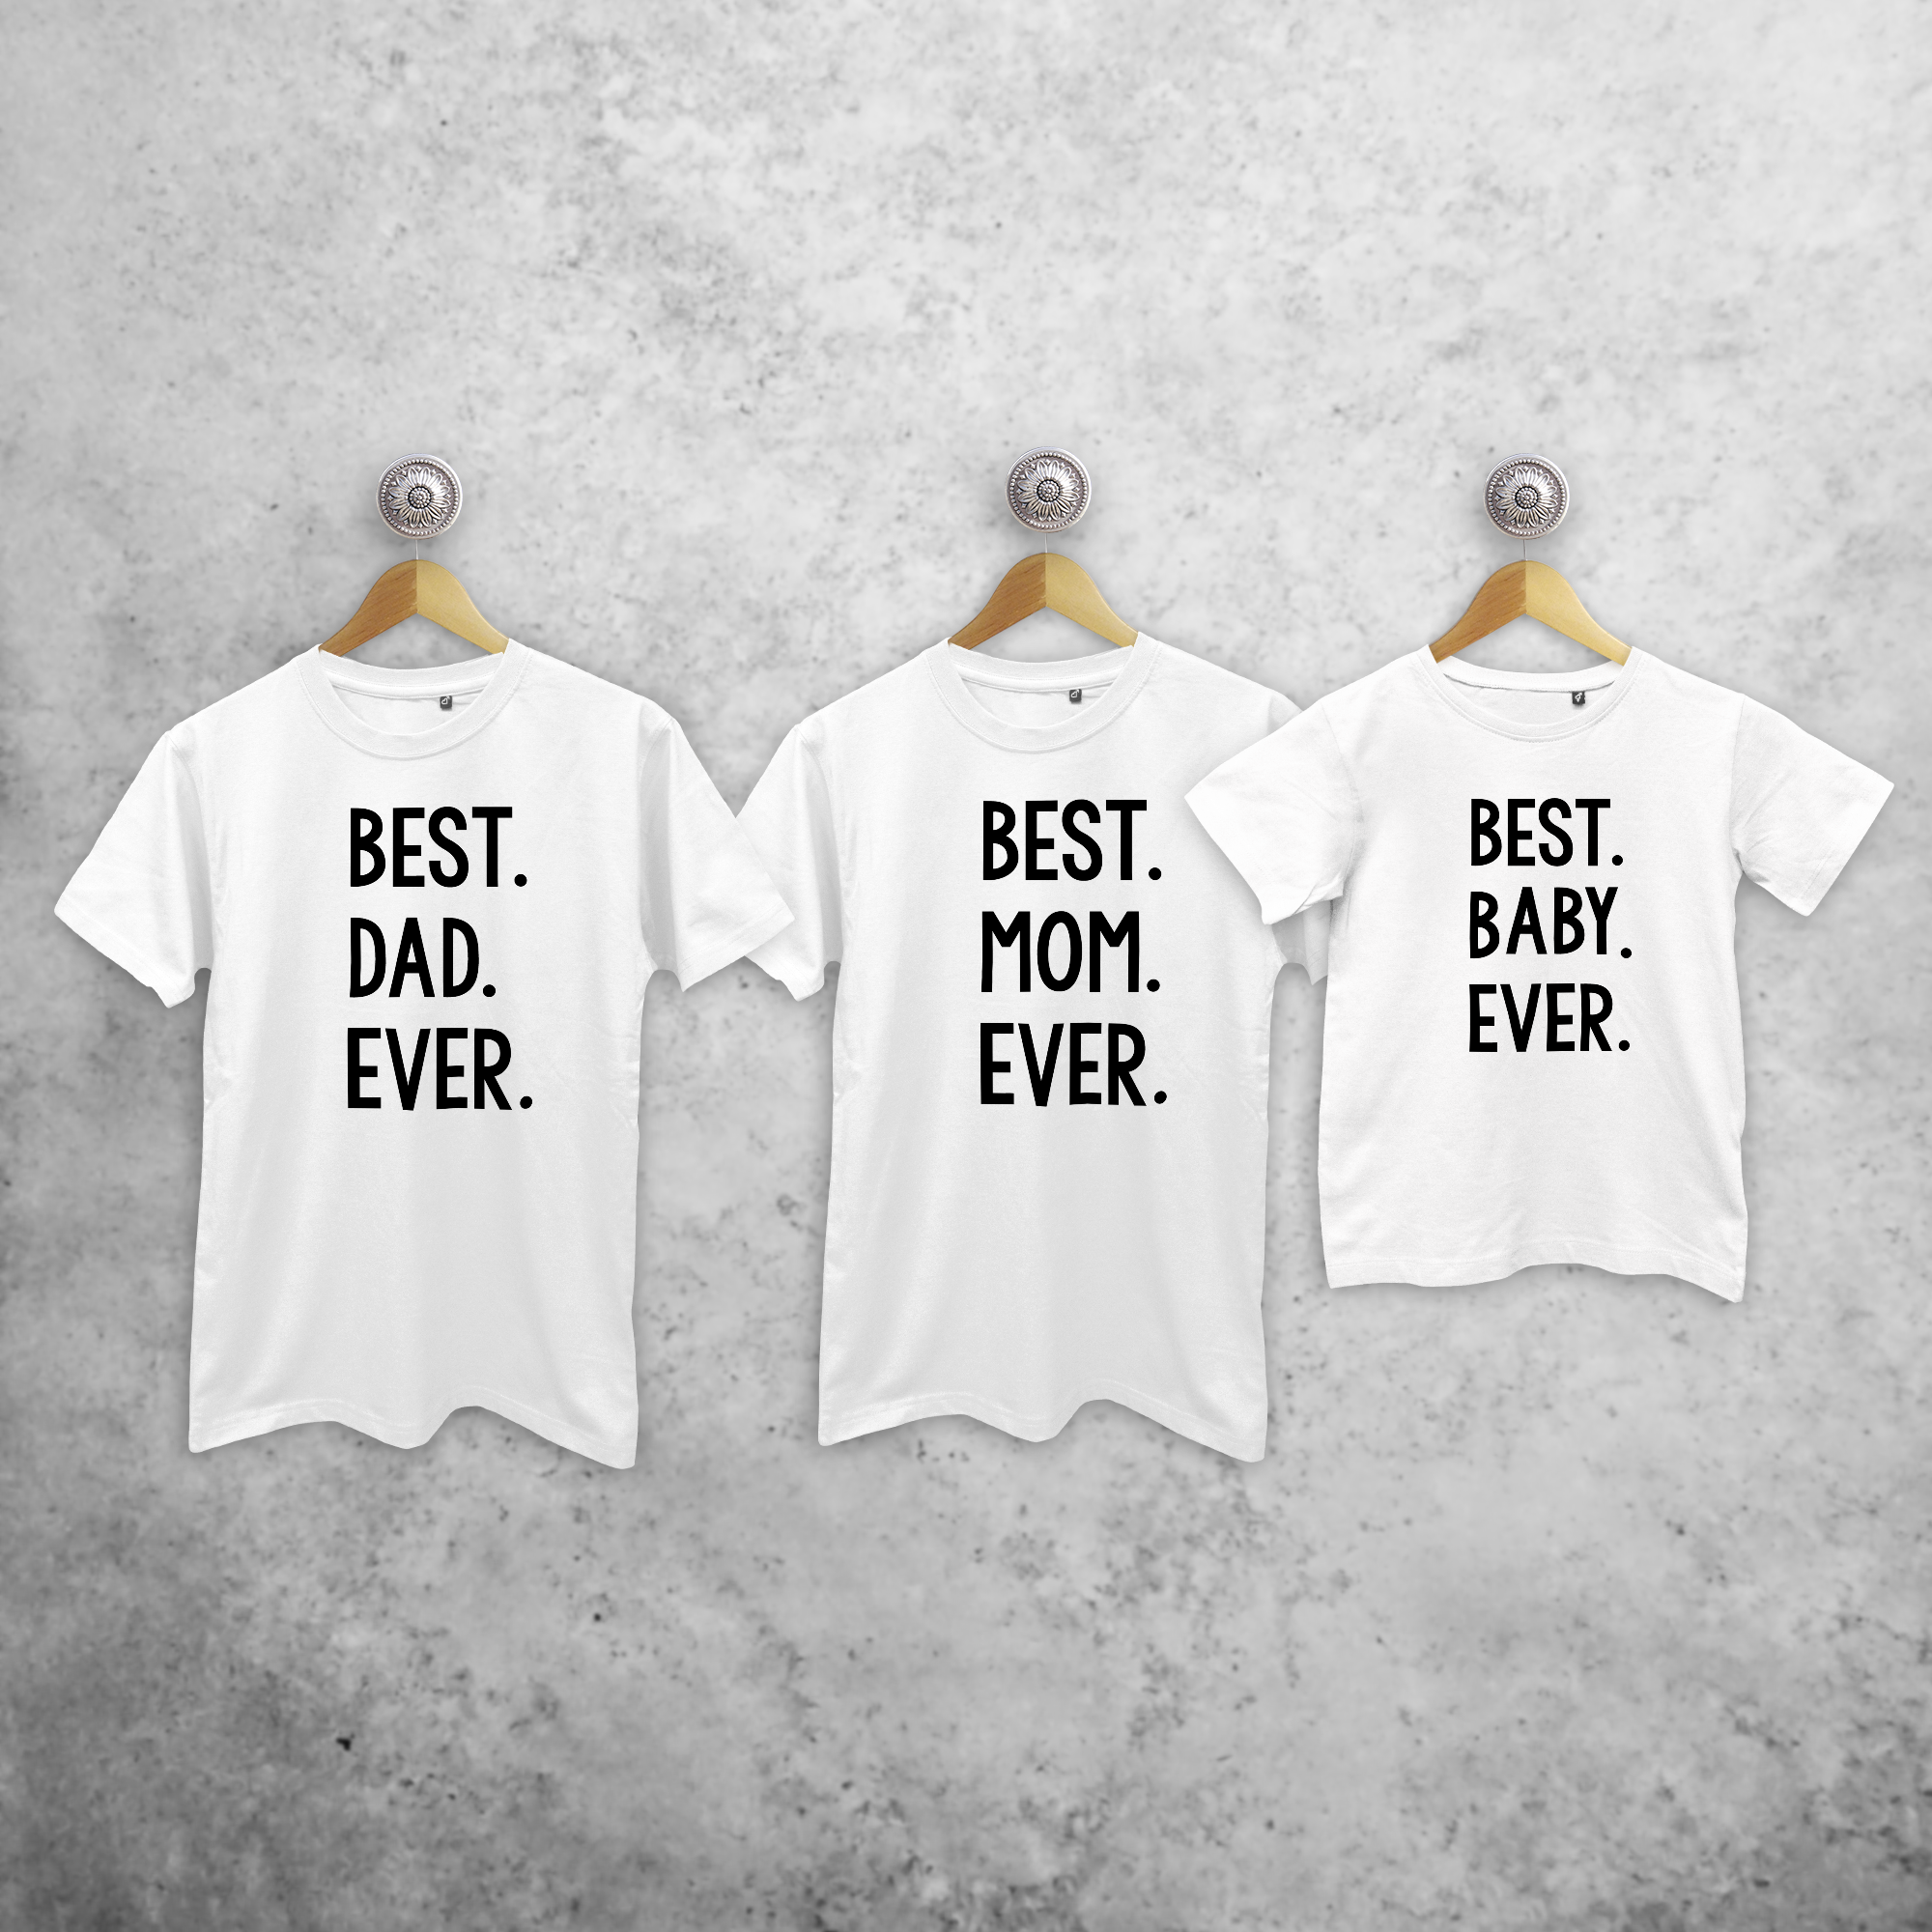 'Best. Dad. Ever.', 'Best. Mom. Ever.' & 'Best. Baby. Ever.' matching shirts